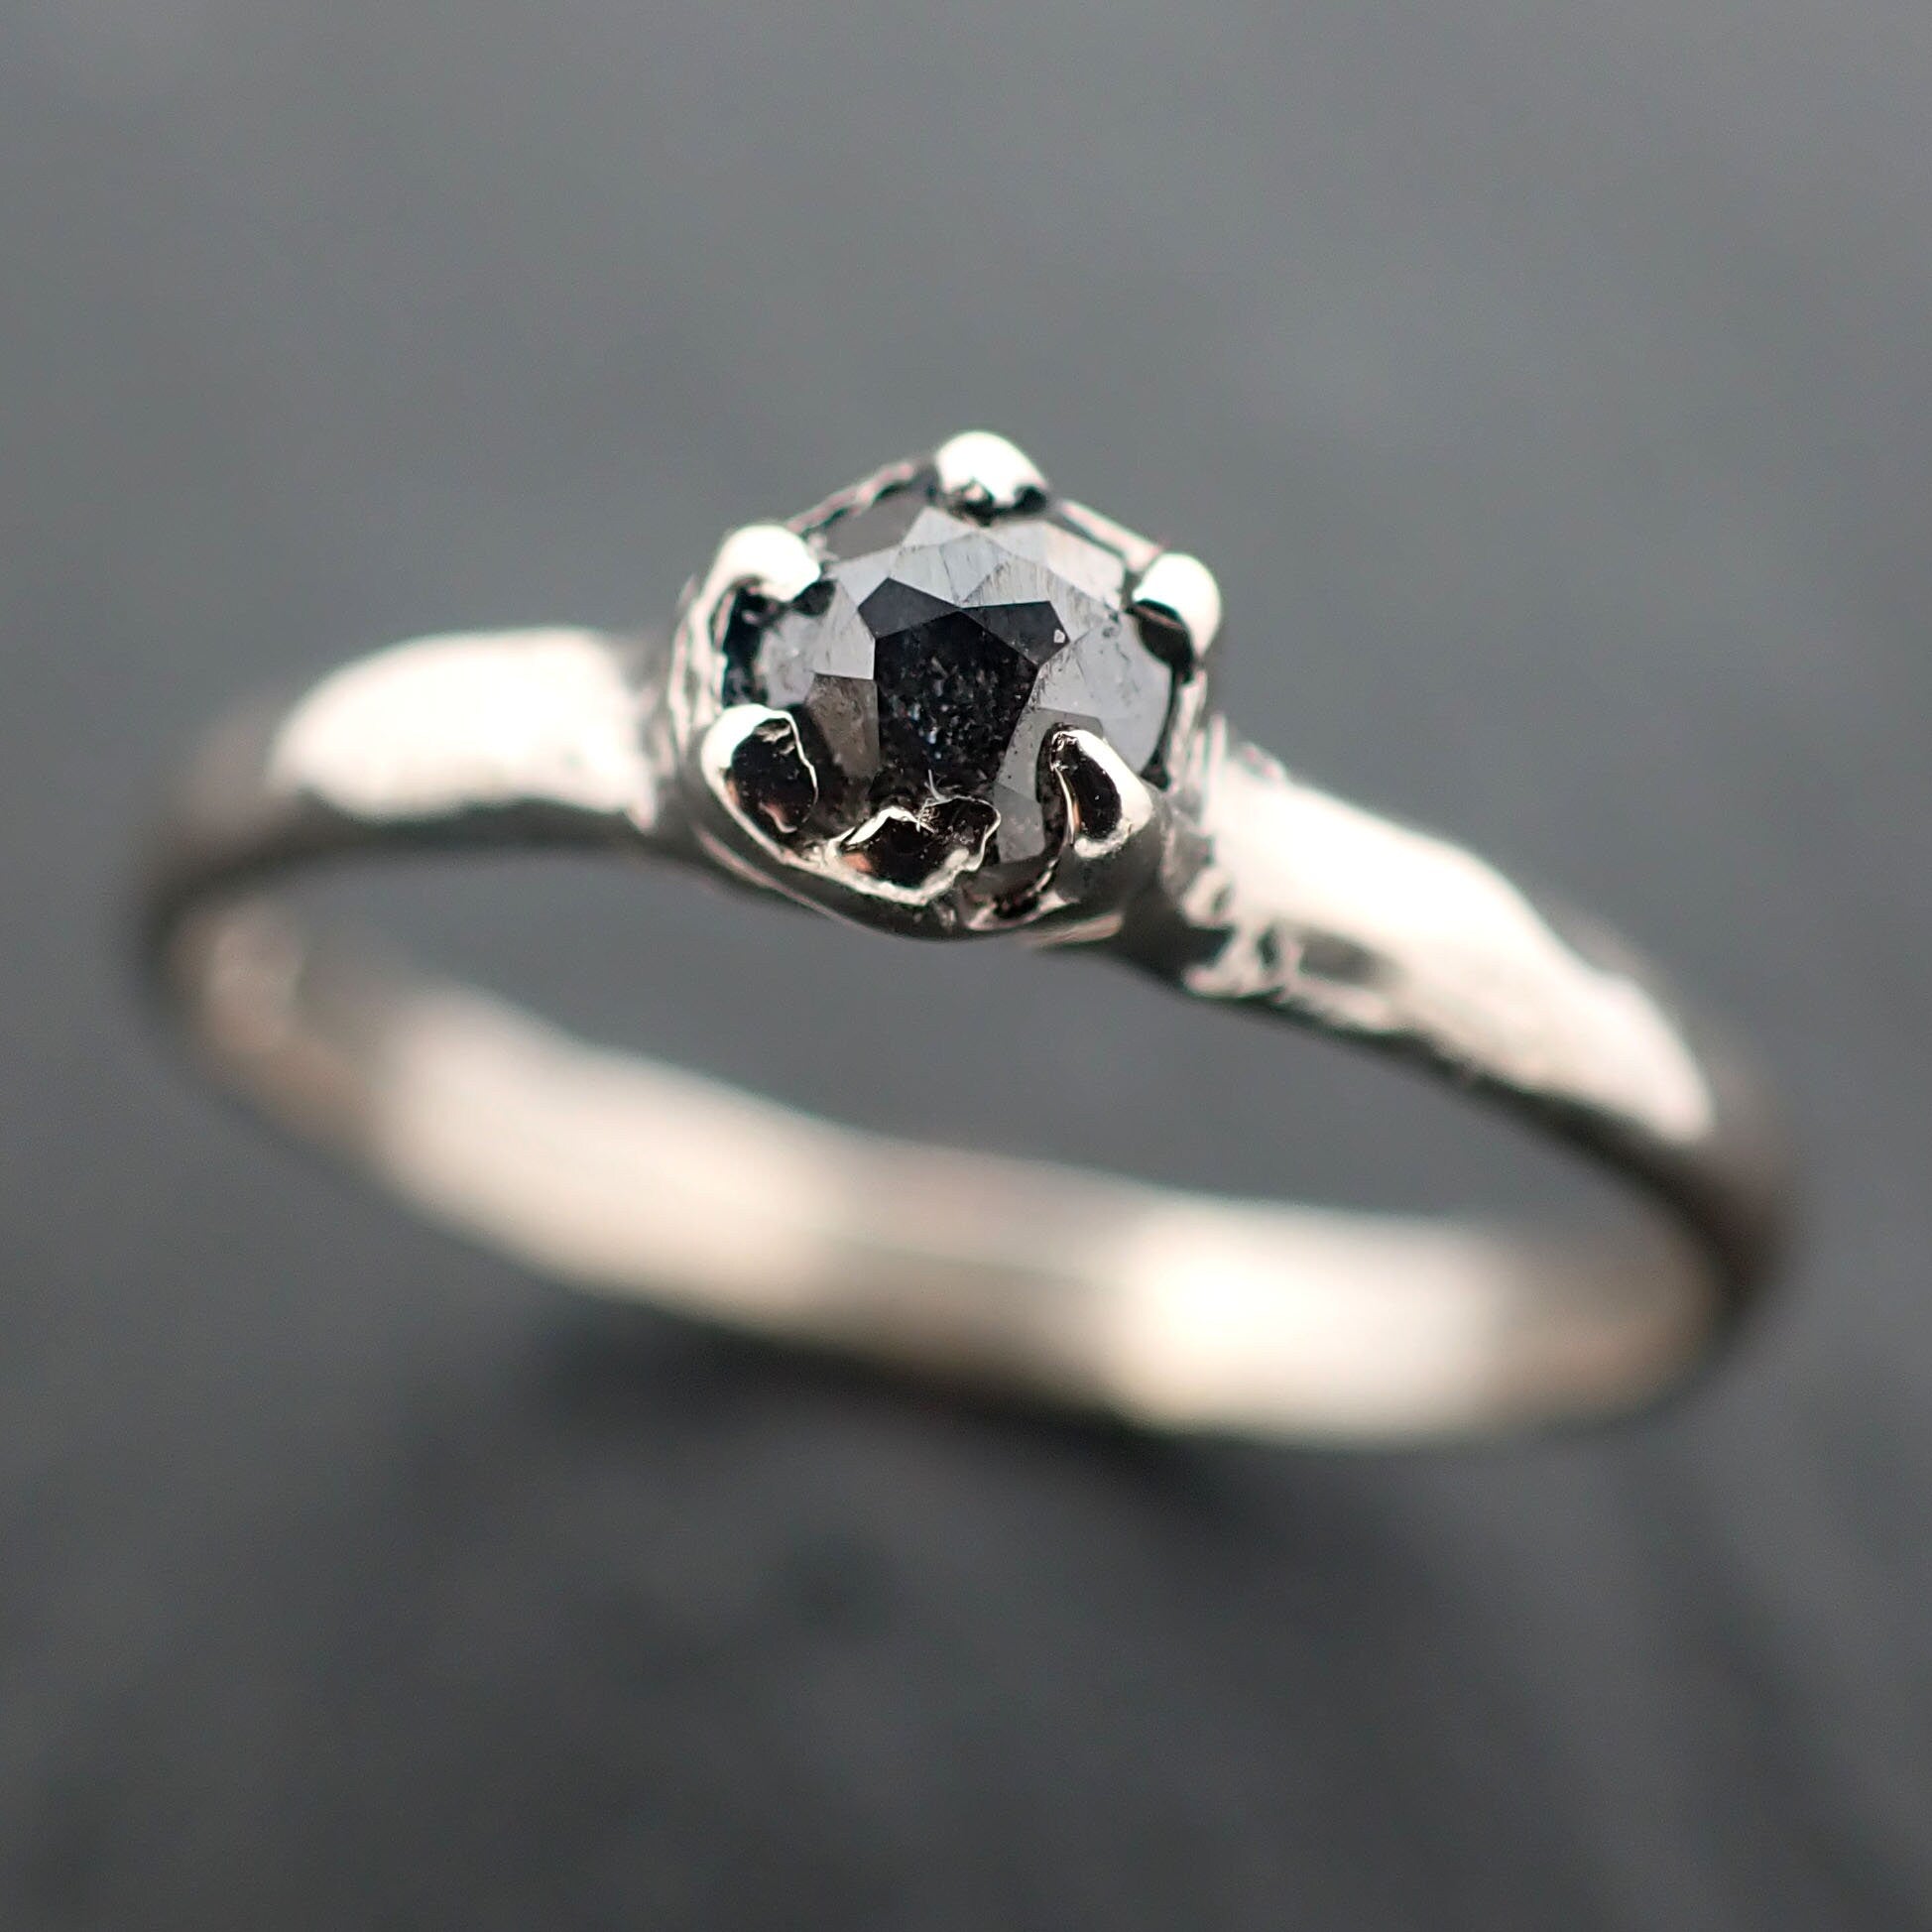 Faceted Fancy cut salt and pepper Diamond Solitaire Engagement 14k White Gold Wedding Ring byAngeline 3513